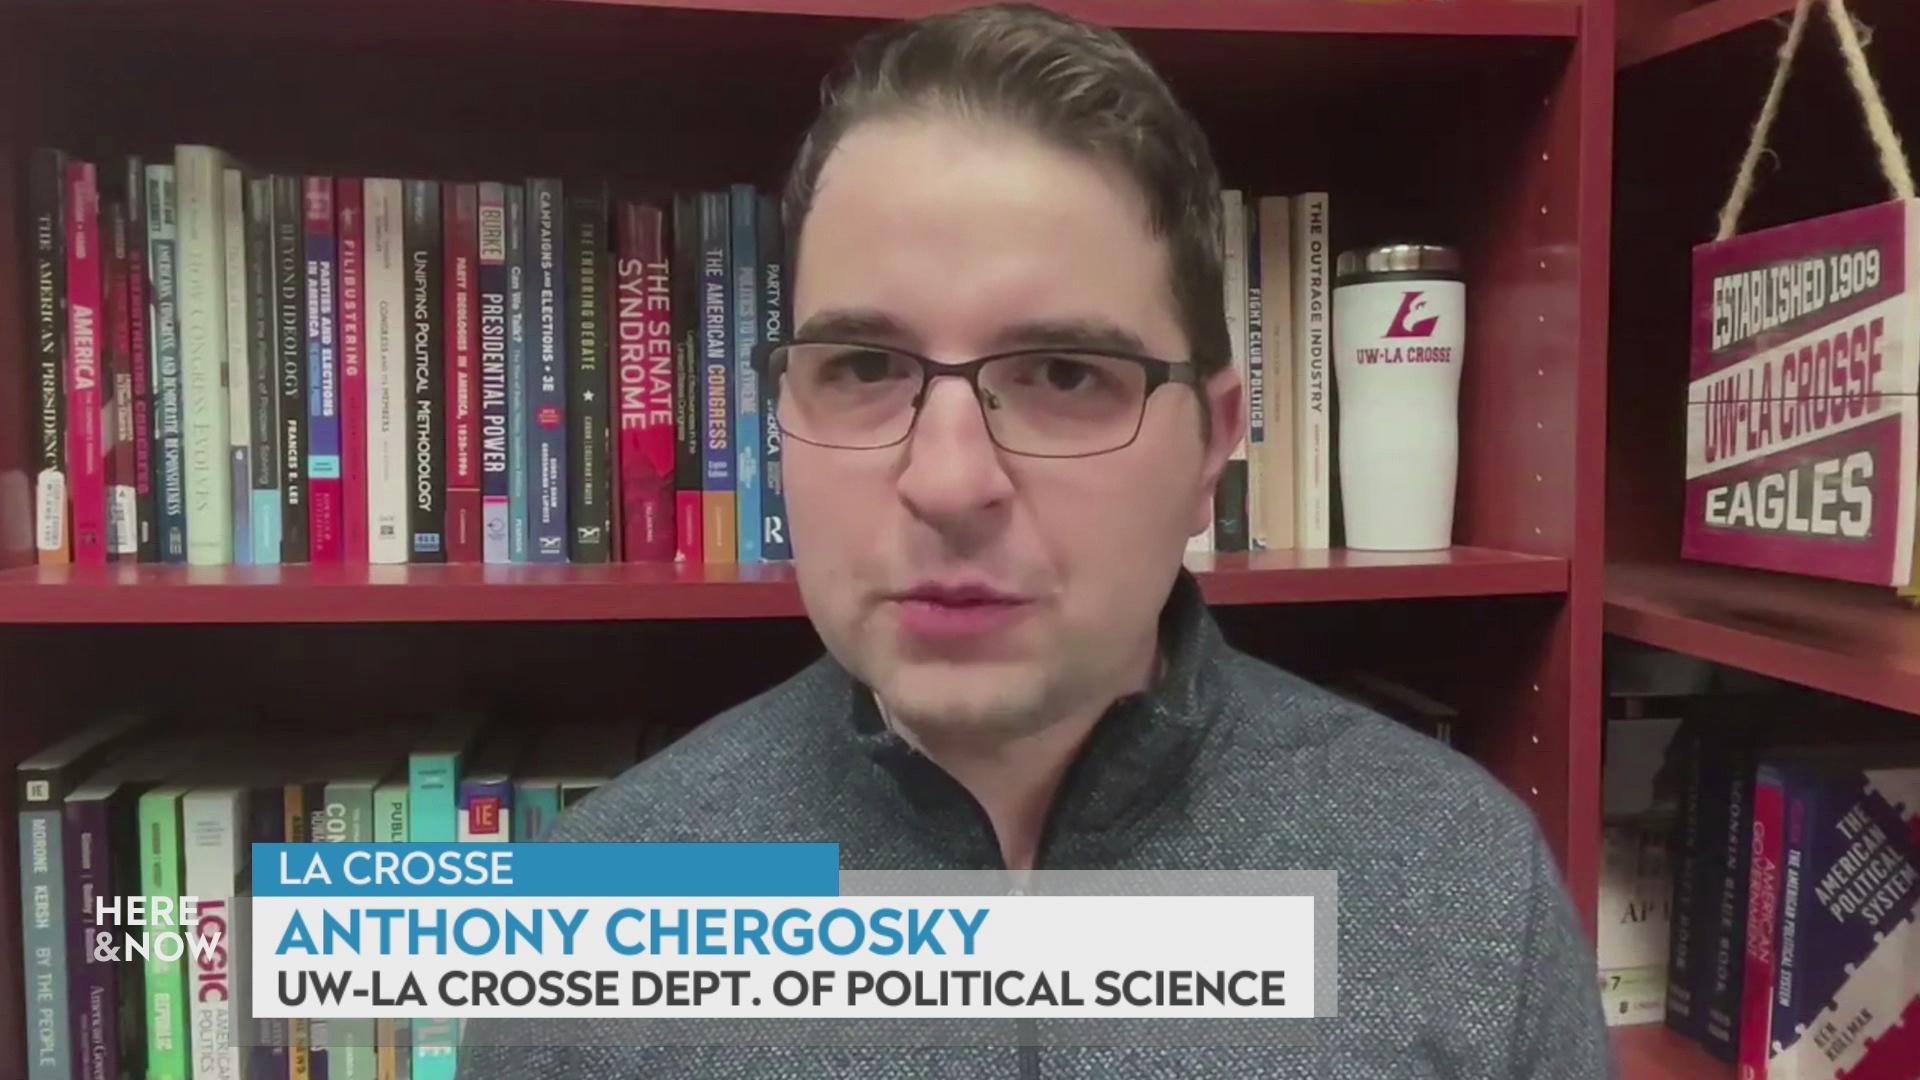 A still image shows Anthony Chergosky seated in front of brown bookshelves lined with books with a graphic at bottom reading 'La Crosse,' 'Anthony Chergosky' and 'UW-La Crosse Dept. of Political Science.'